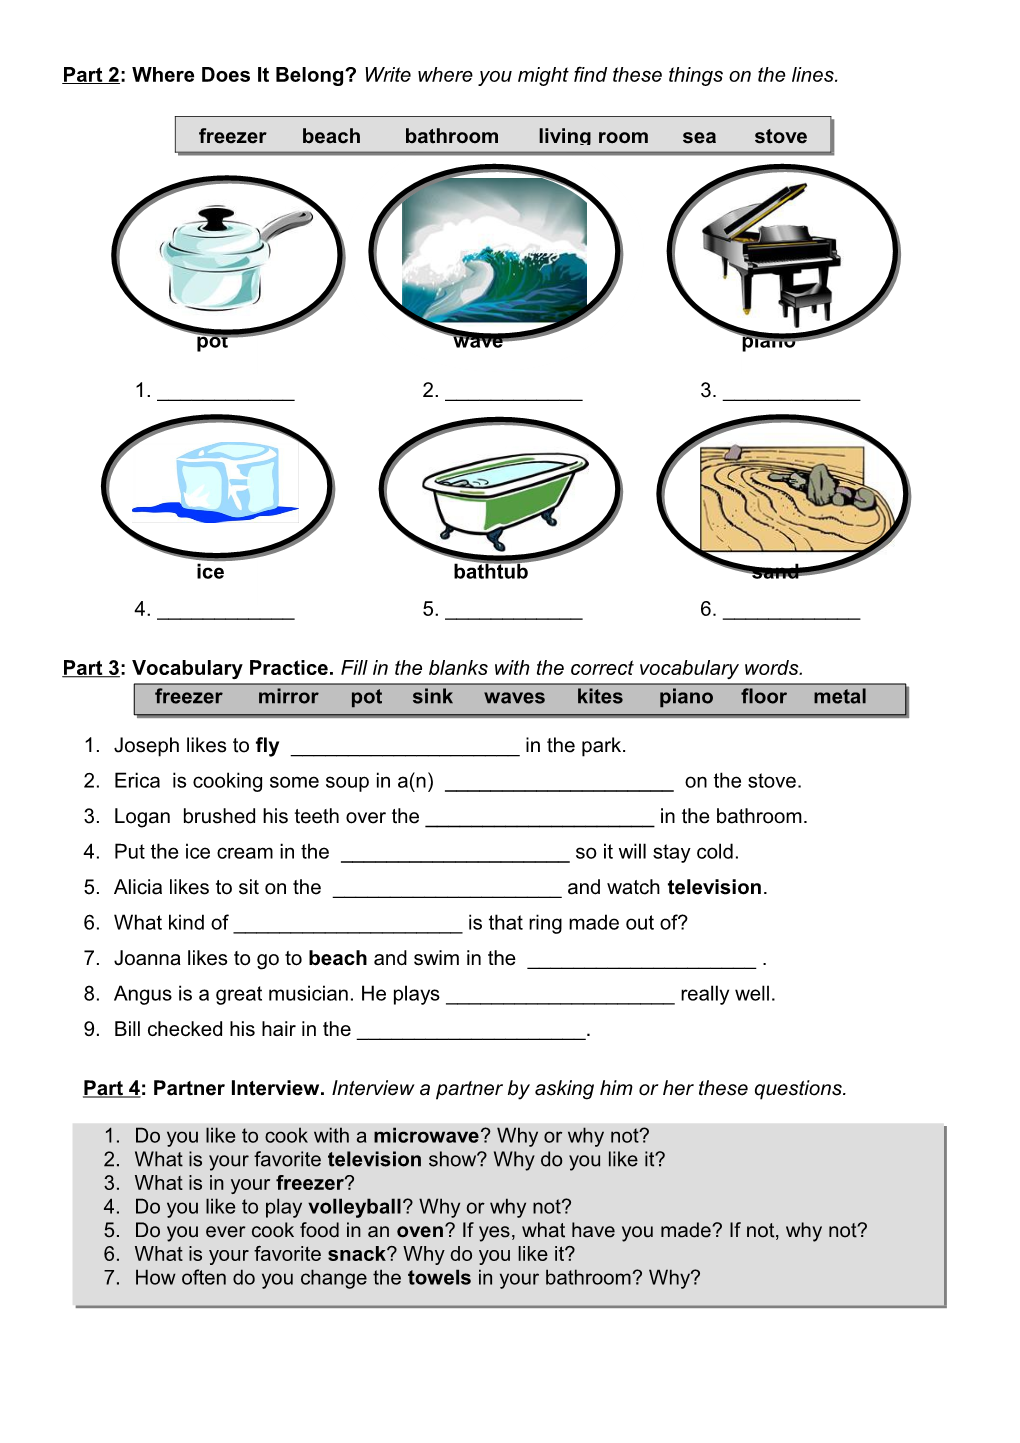 Activity Focus: Reading Comprehension, Where Does It Belong?, Vocabulary Practice, Partner